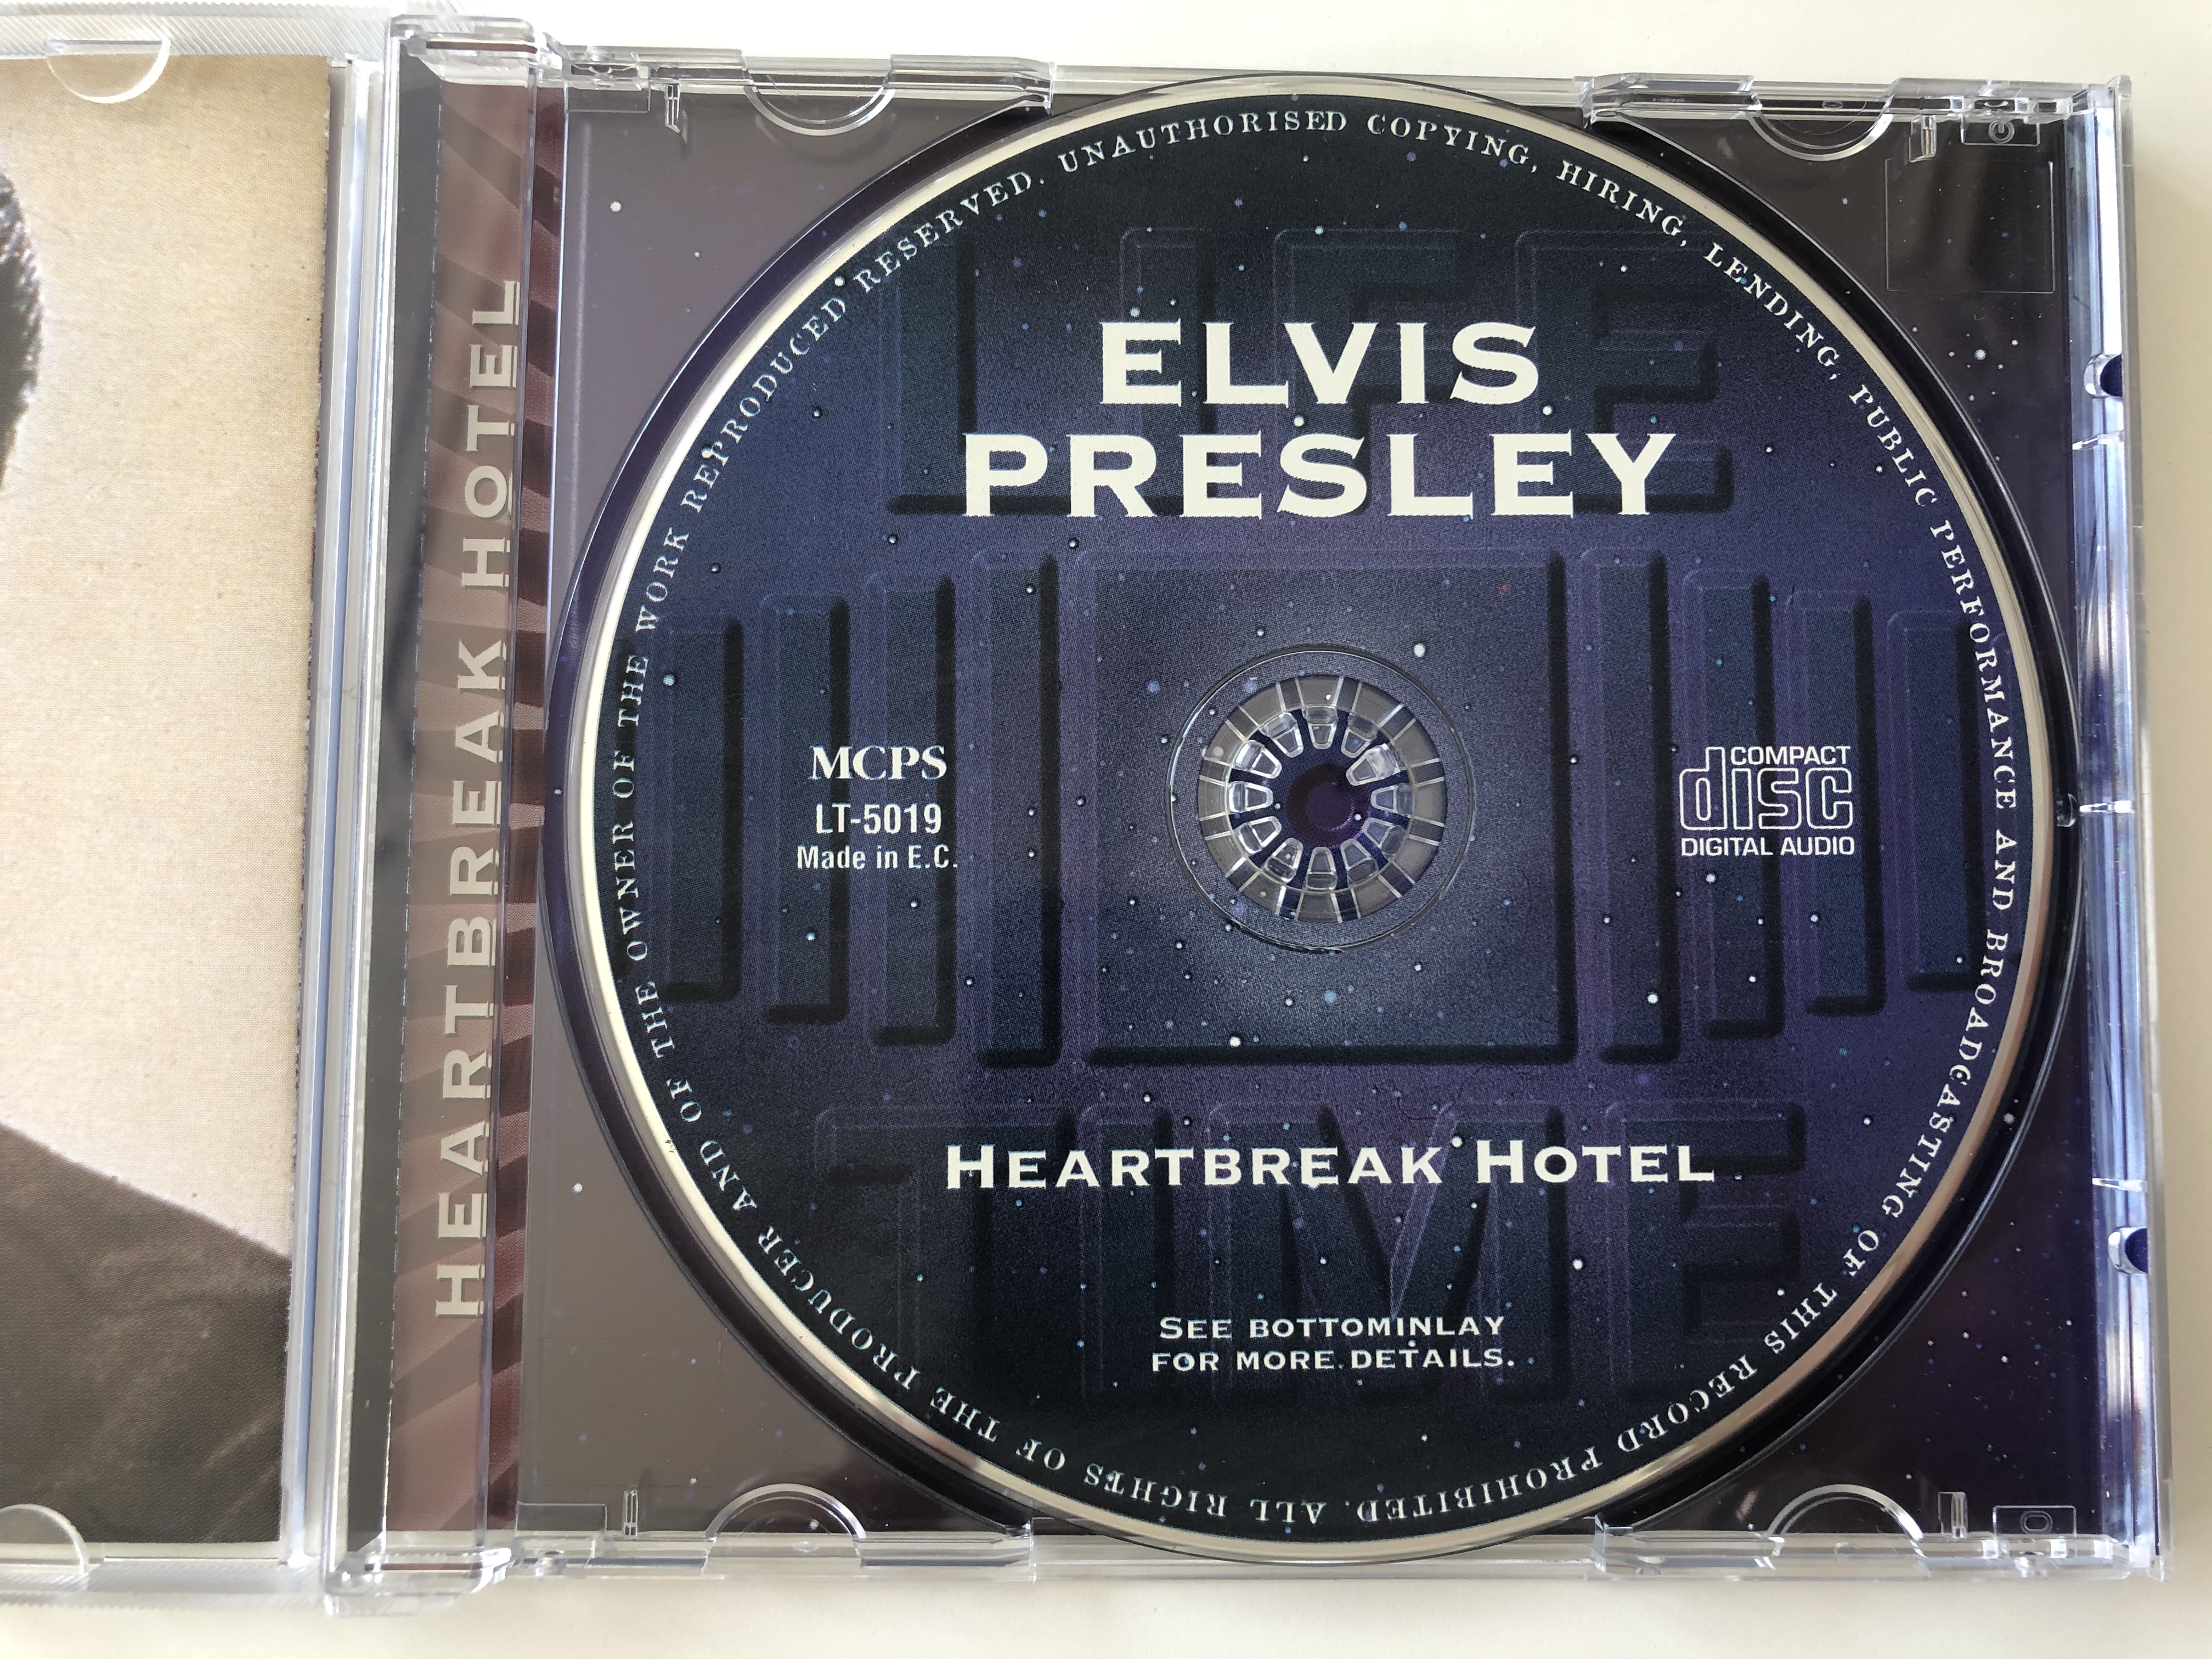 elvis-presley-heartbreak-hotel-long-tall-sally-blue-suede-shoes-that-s-all-right-hound-dog-life-time-audio-cd-lt-5019-2-.jpg